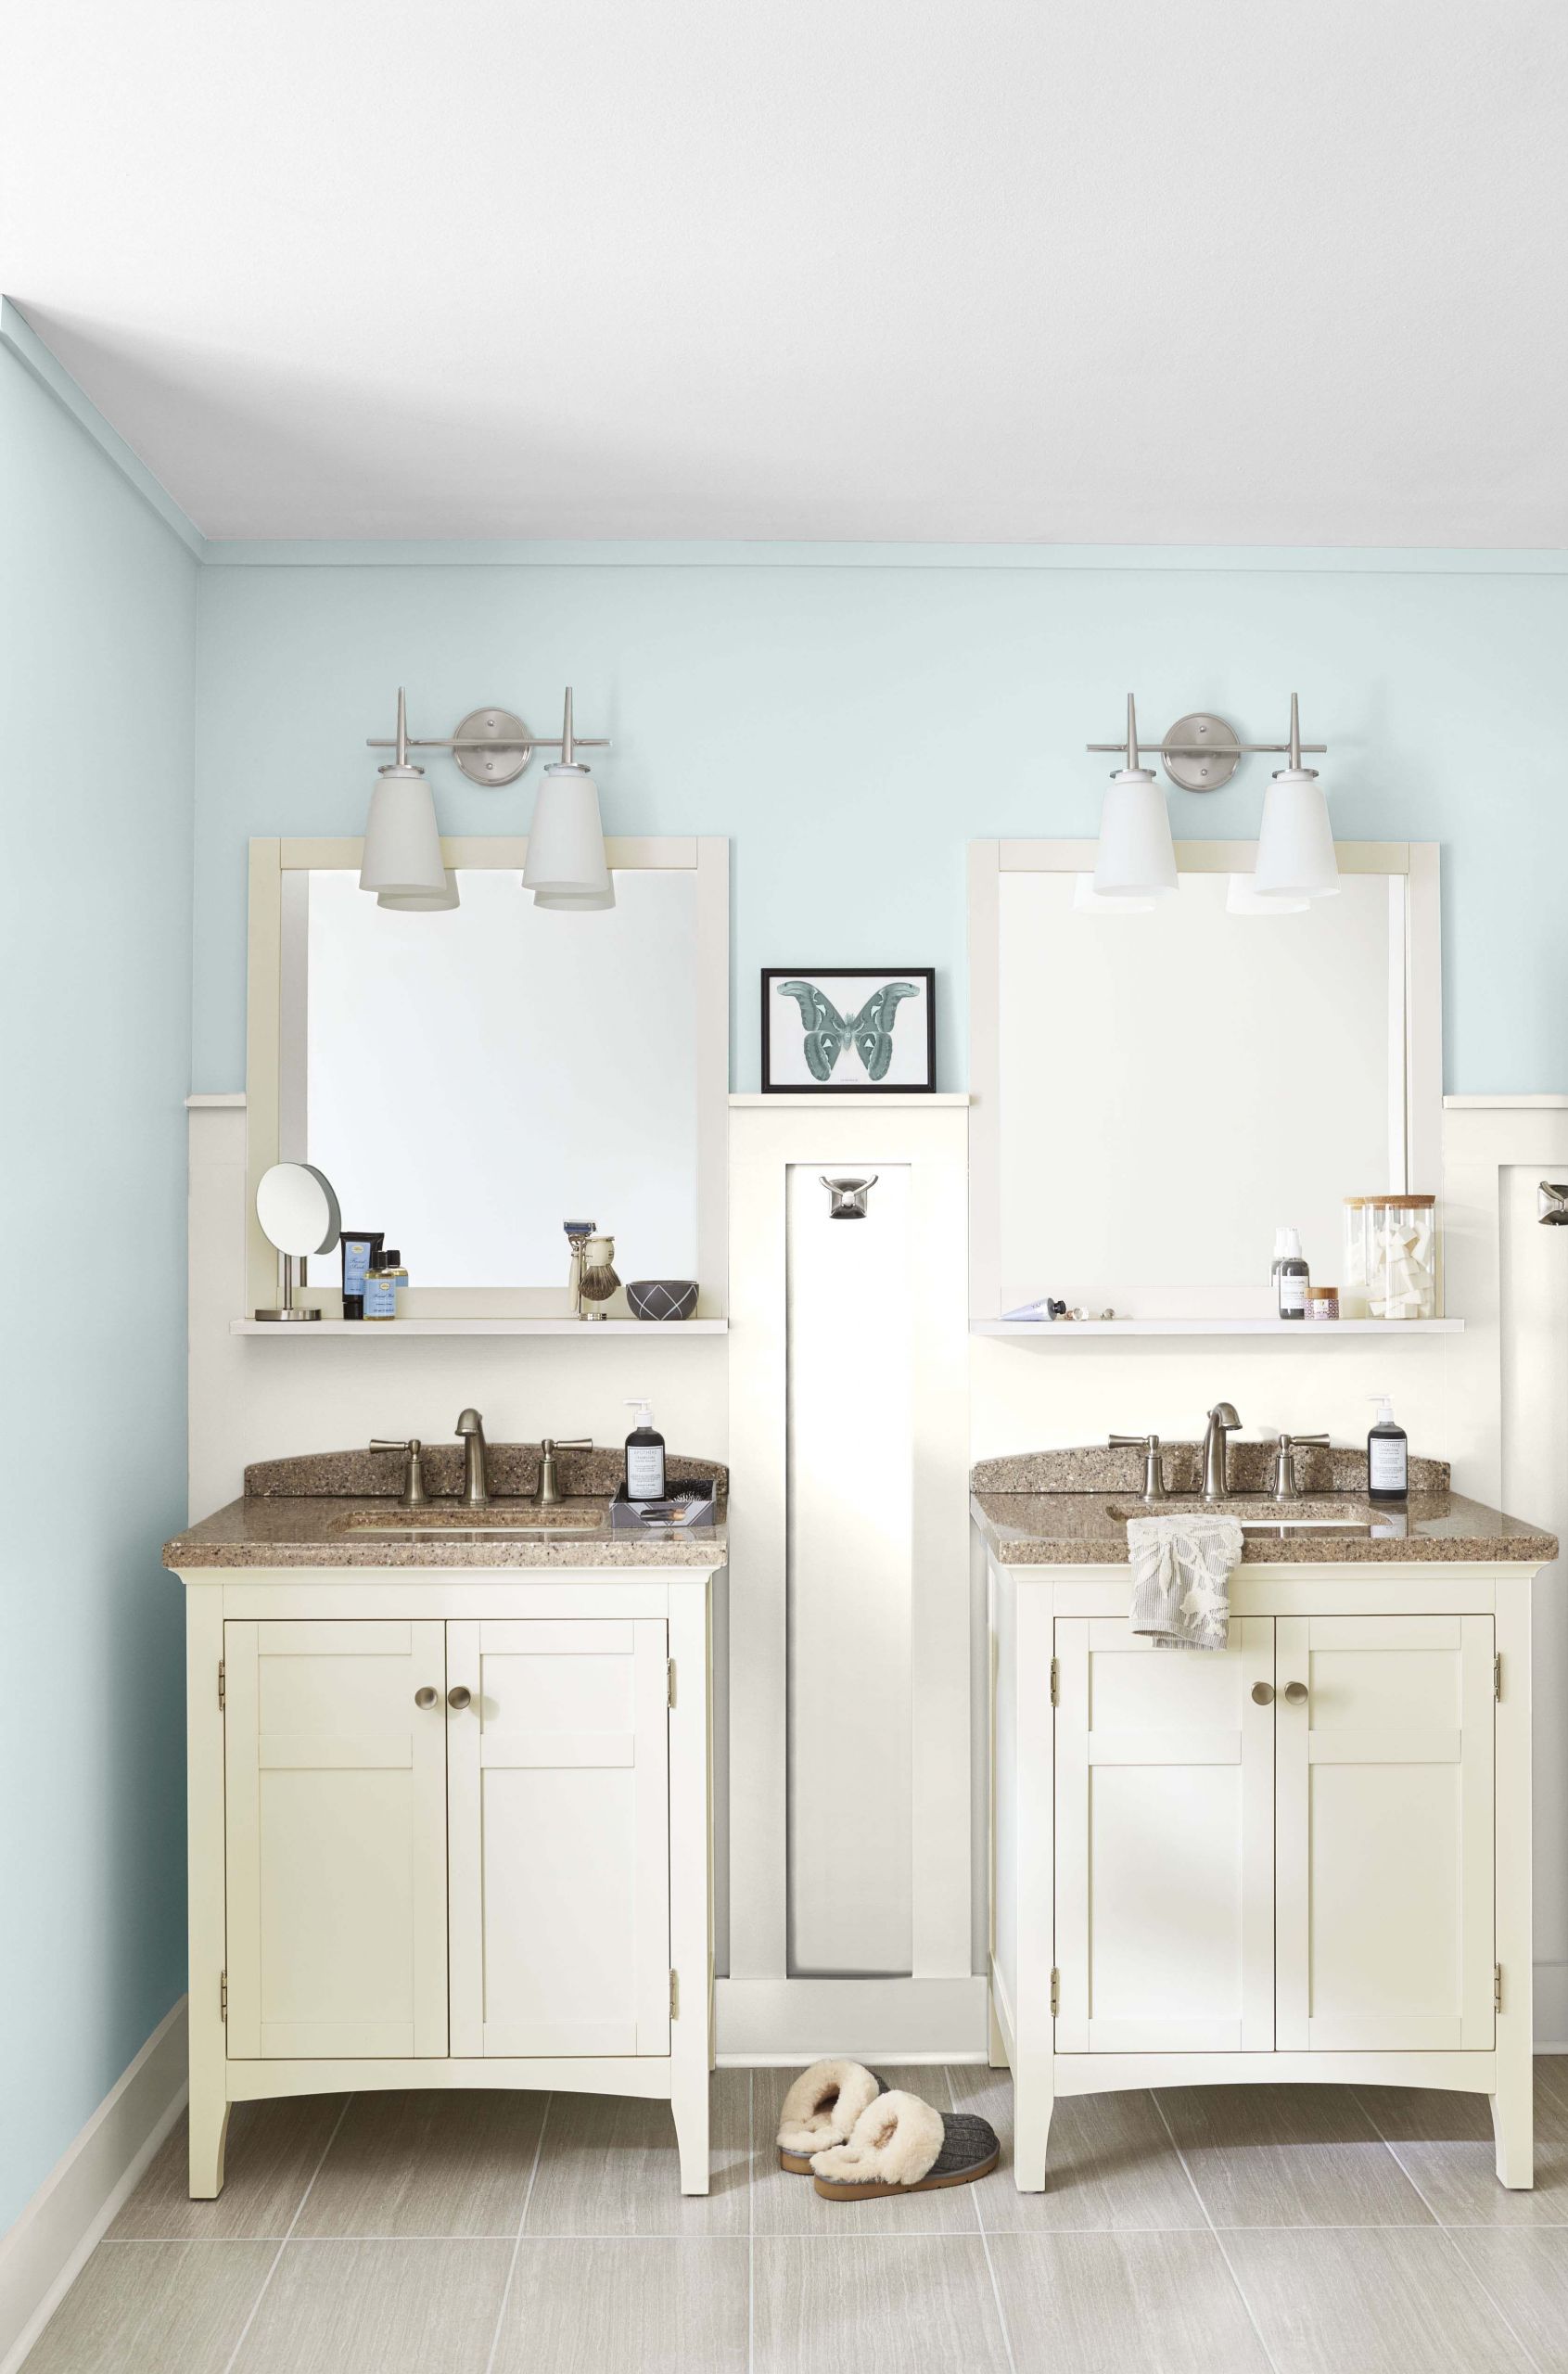 Lowes Bathroom Design
 Let Lowe’s design and installation experts help you style